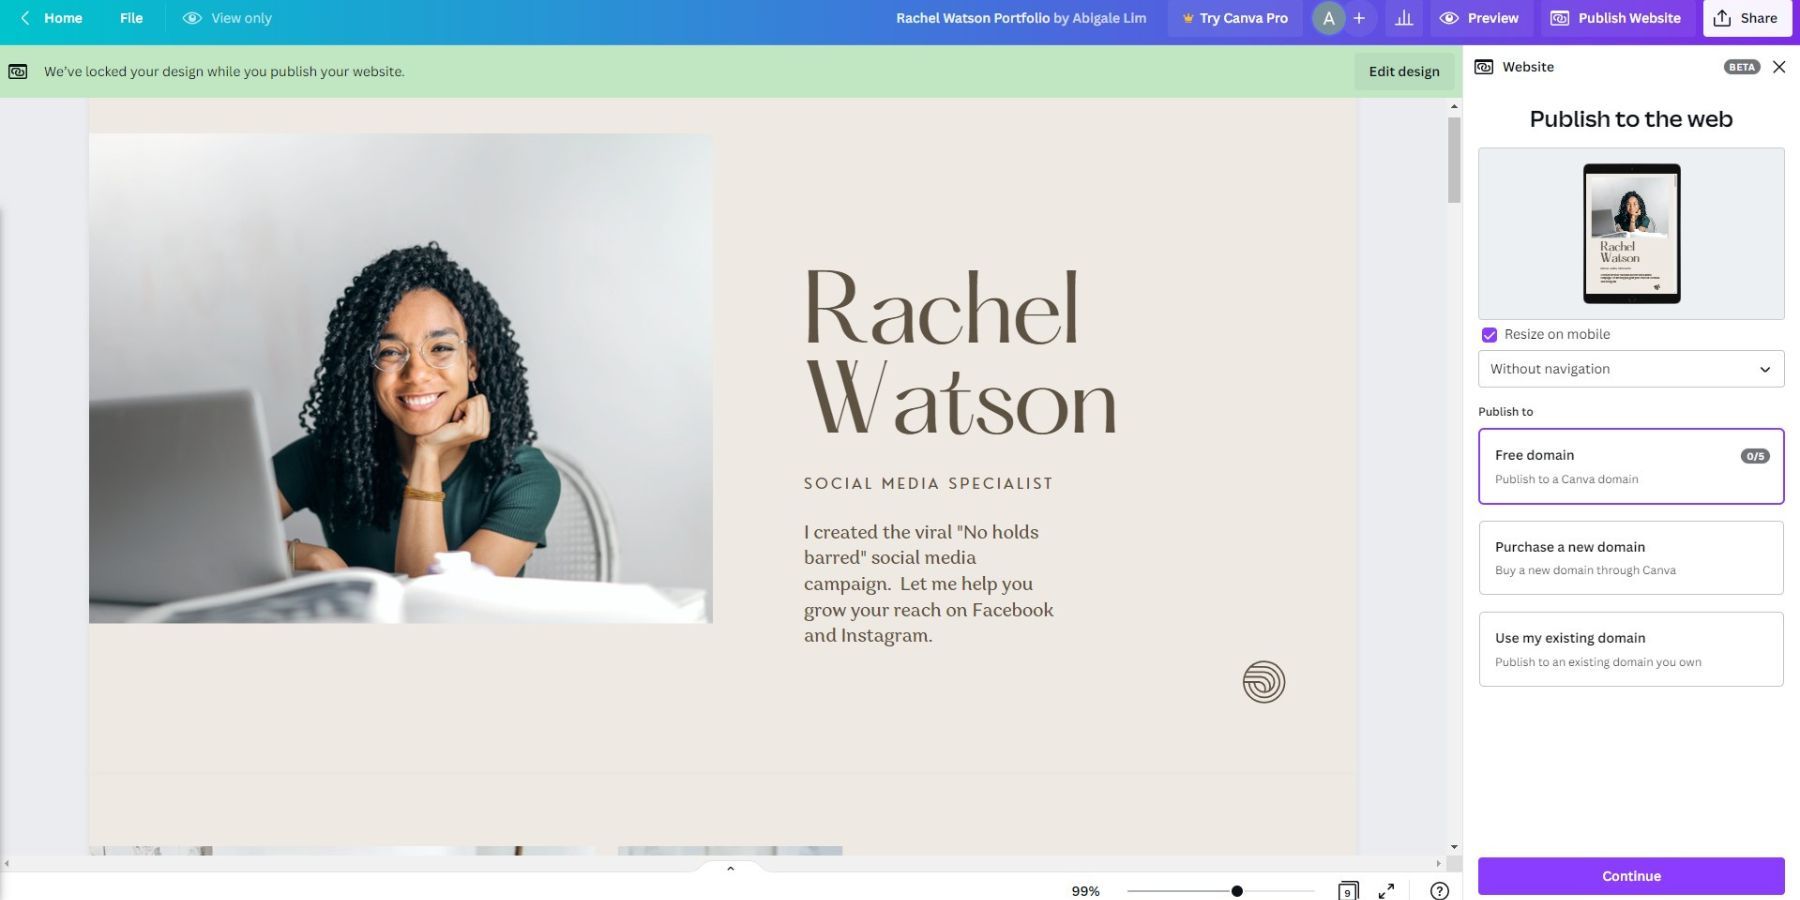 Canva sample portfolio template showing publish to the web options